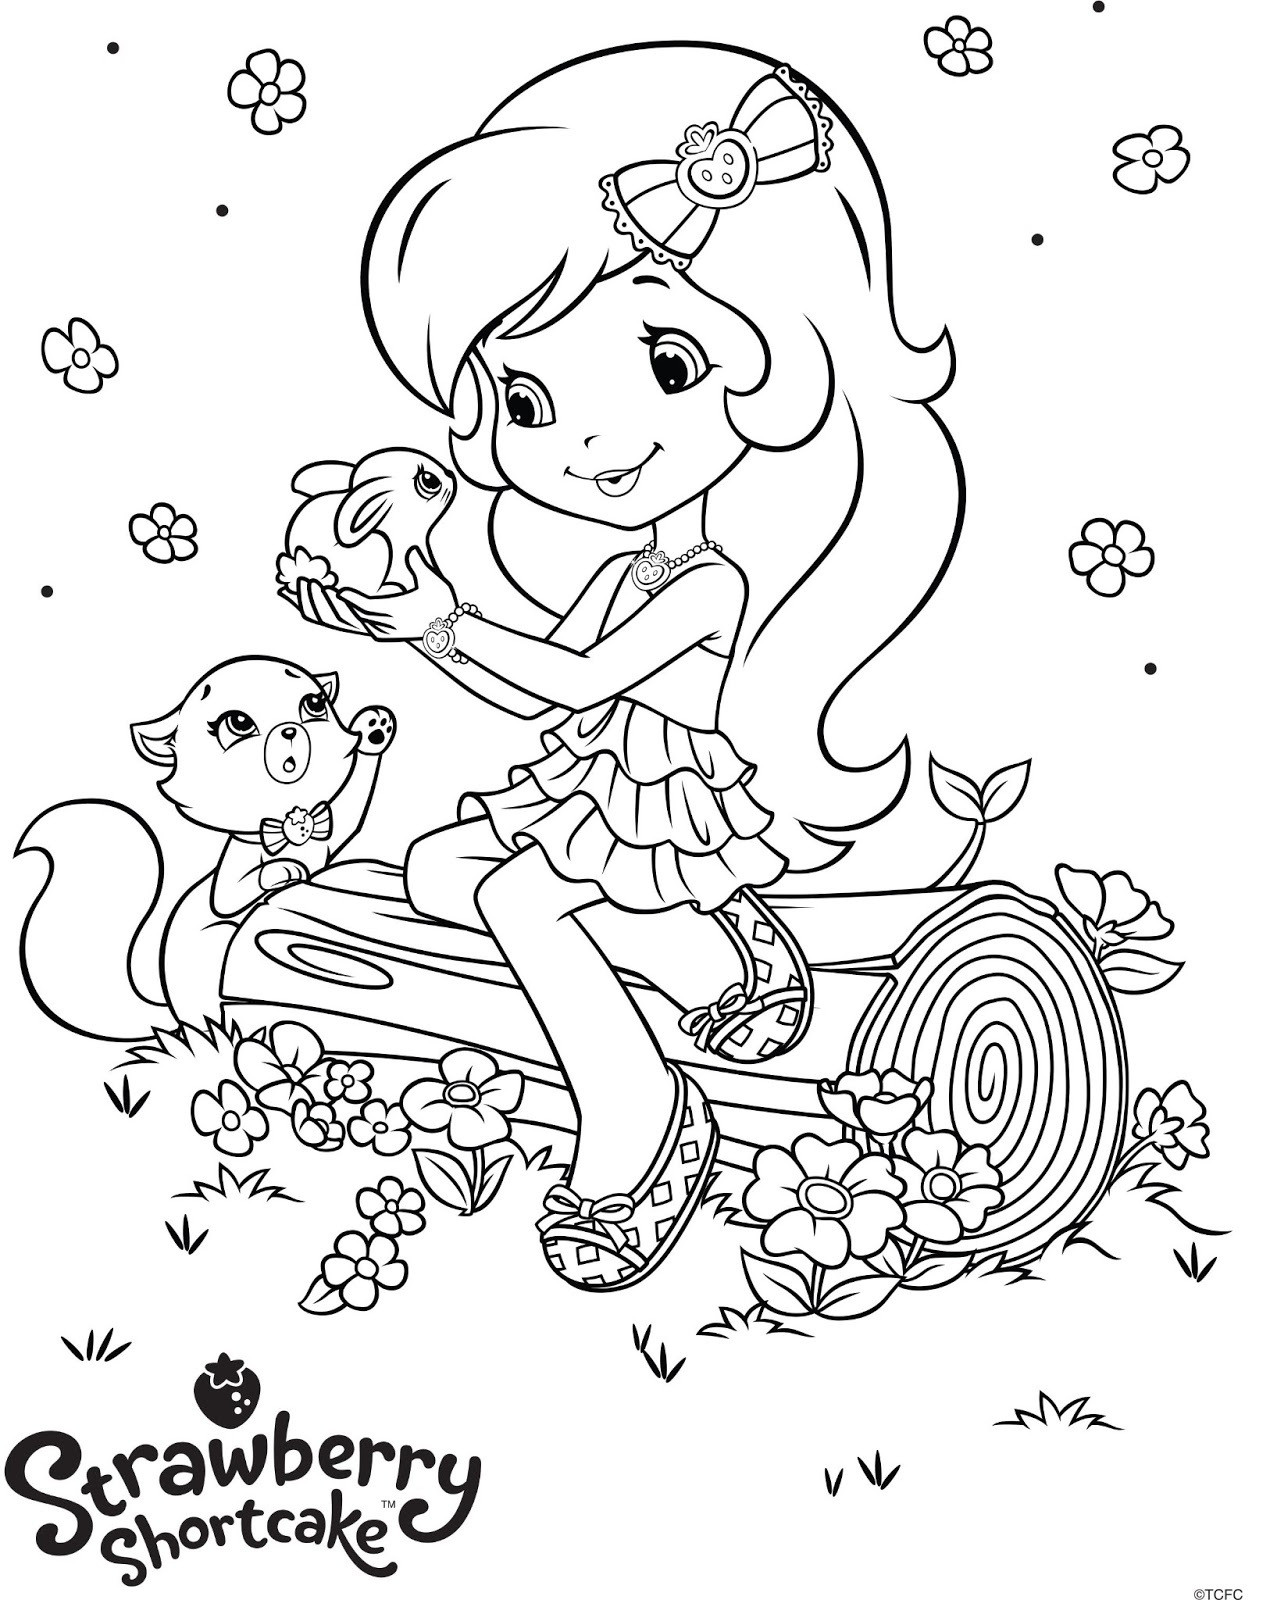 Strawberry Shortcake Coloring Page
 Strawberry Shortcake Coloring Pages Bestofcoloring